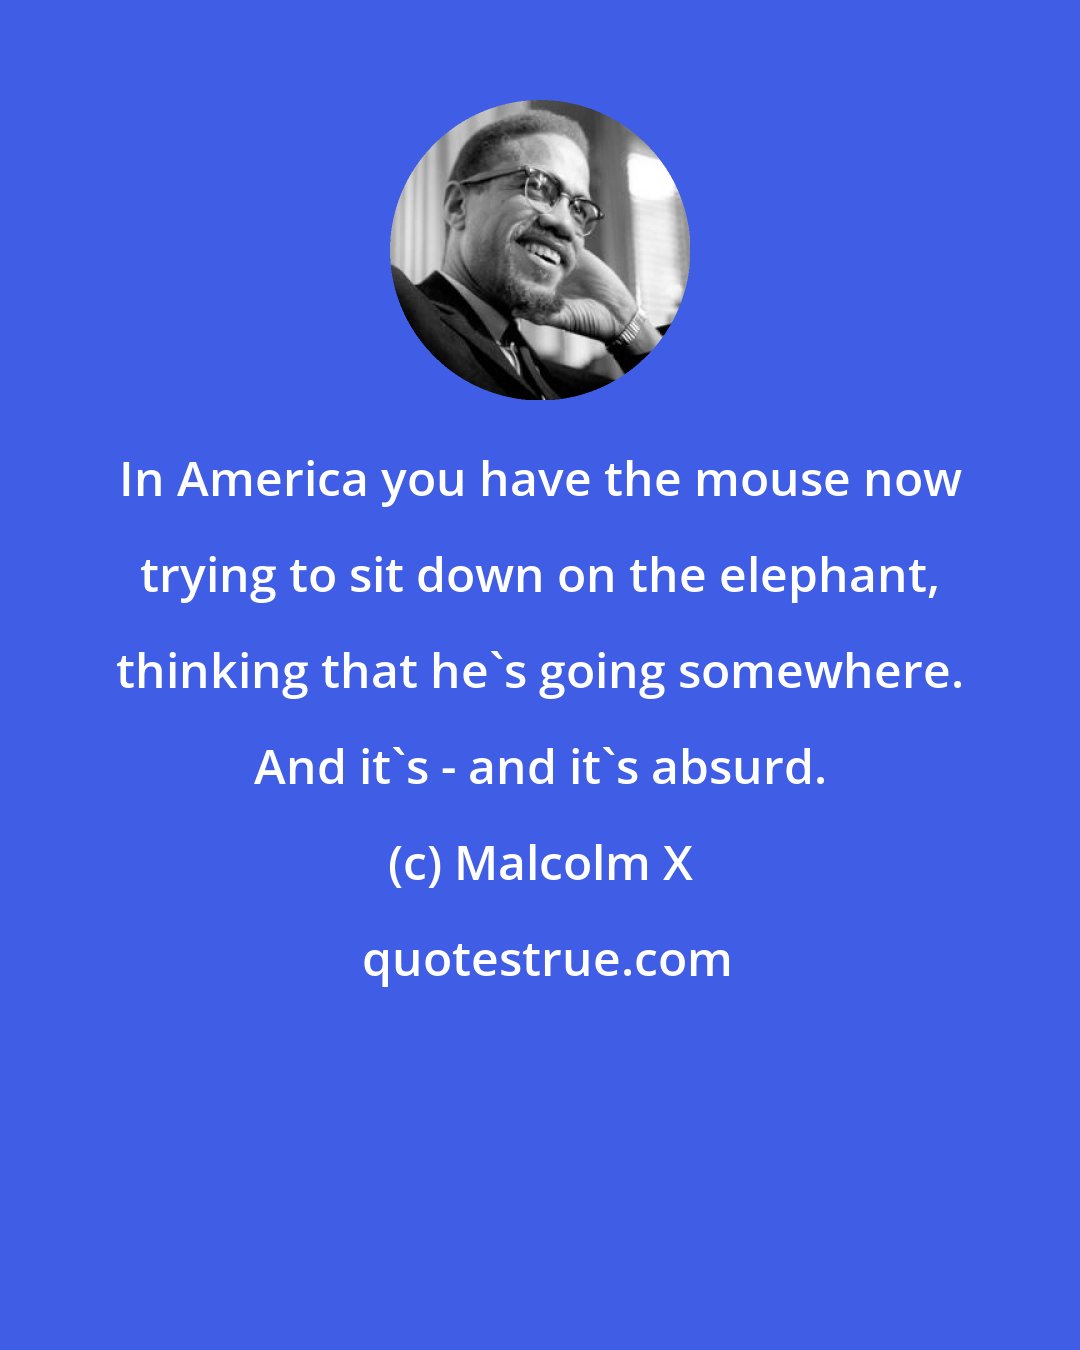 Malcolm X: In America you have the mouse now trying to sit down on the elephant, thinking that he's going somewhere. And it's - and it's absurd.